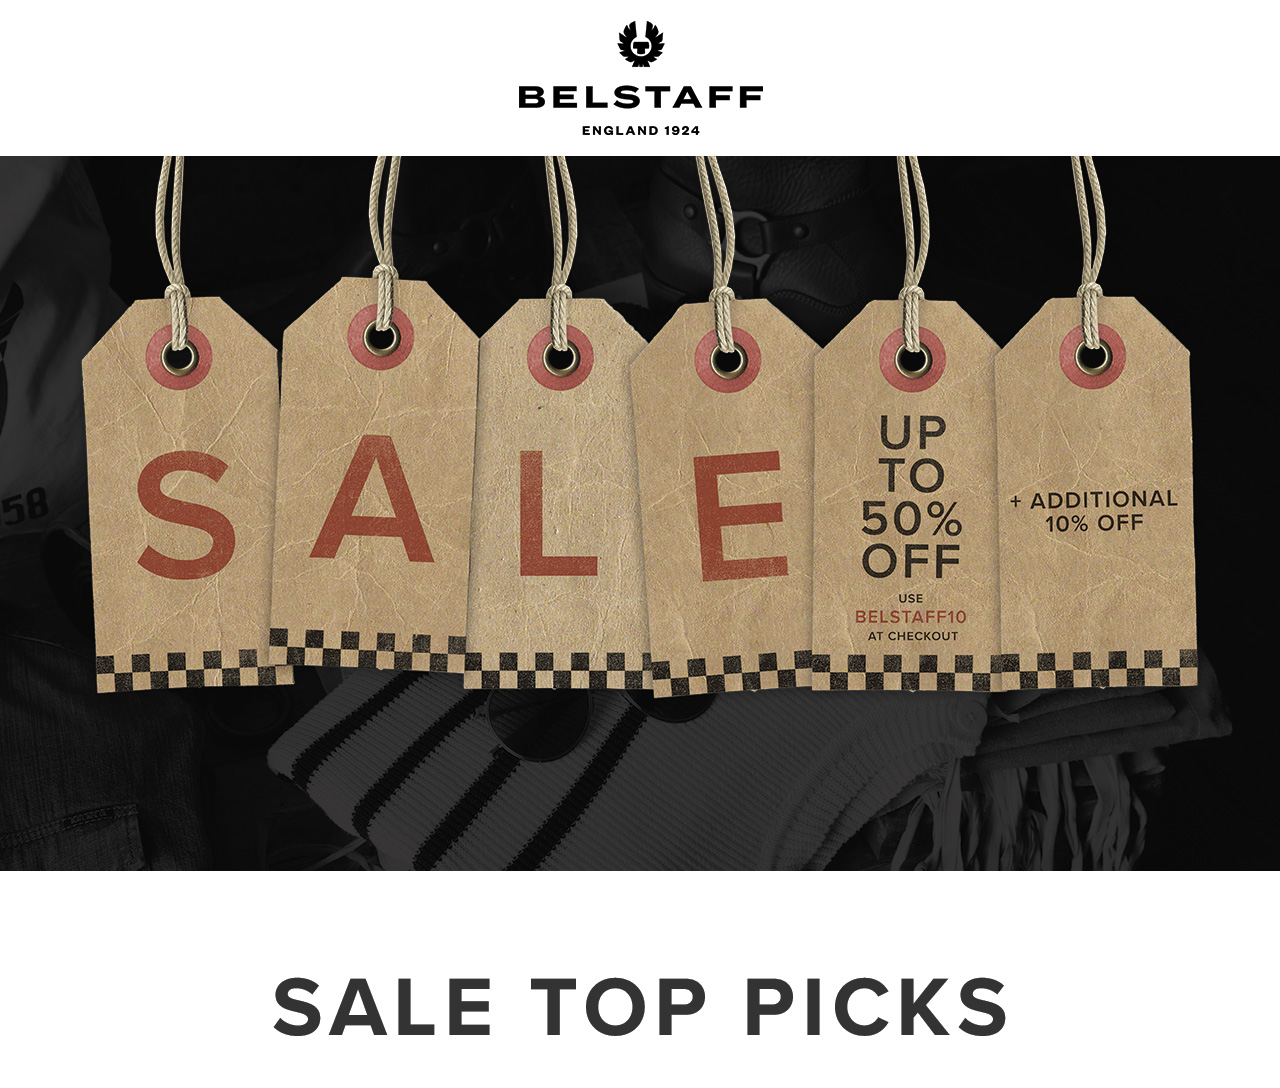 Use code BELSTAFF10 at checkout to get an extra 10% off sale styles.